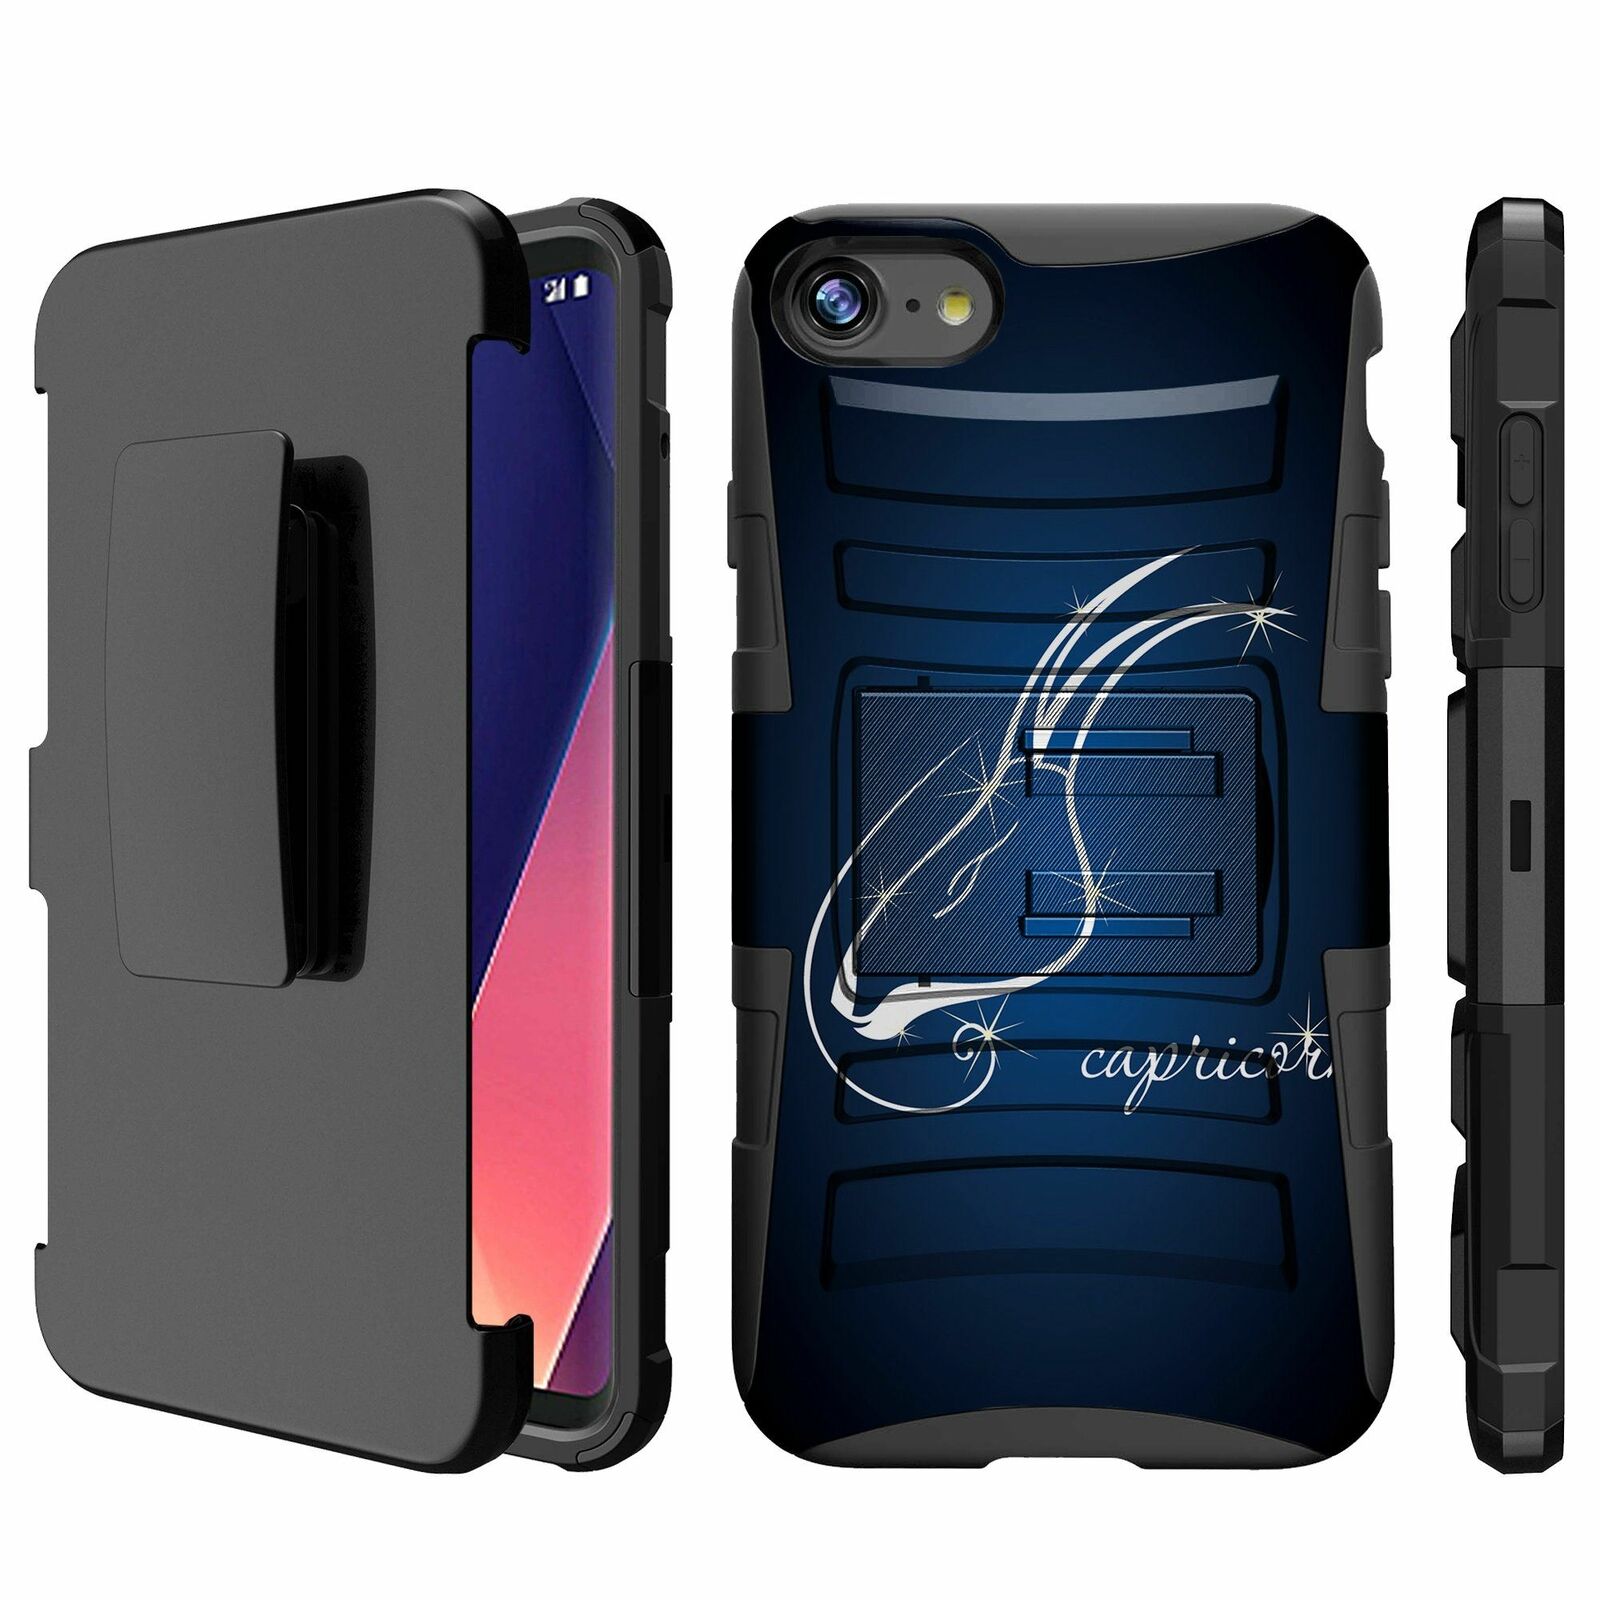 For Apple iPhone 8 | iPhone 8 2017 Holster & Kickstand Combo Case-Zodiac Signs iPhone Cases AtlasCase Capricorn 